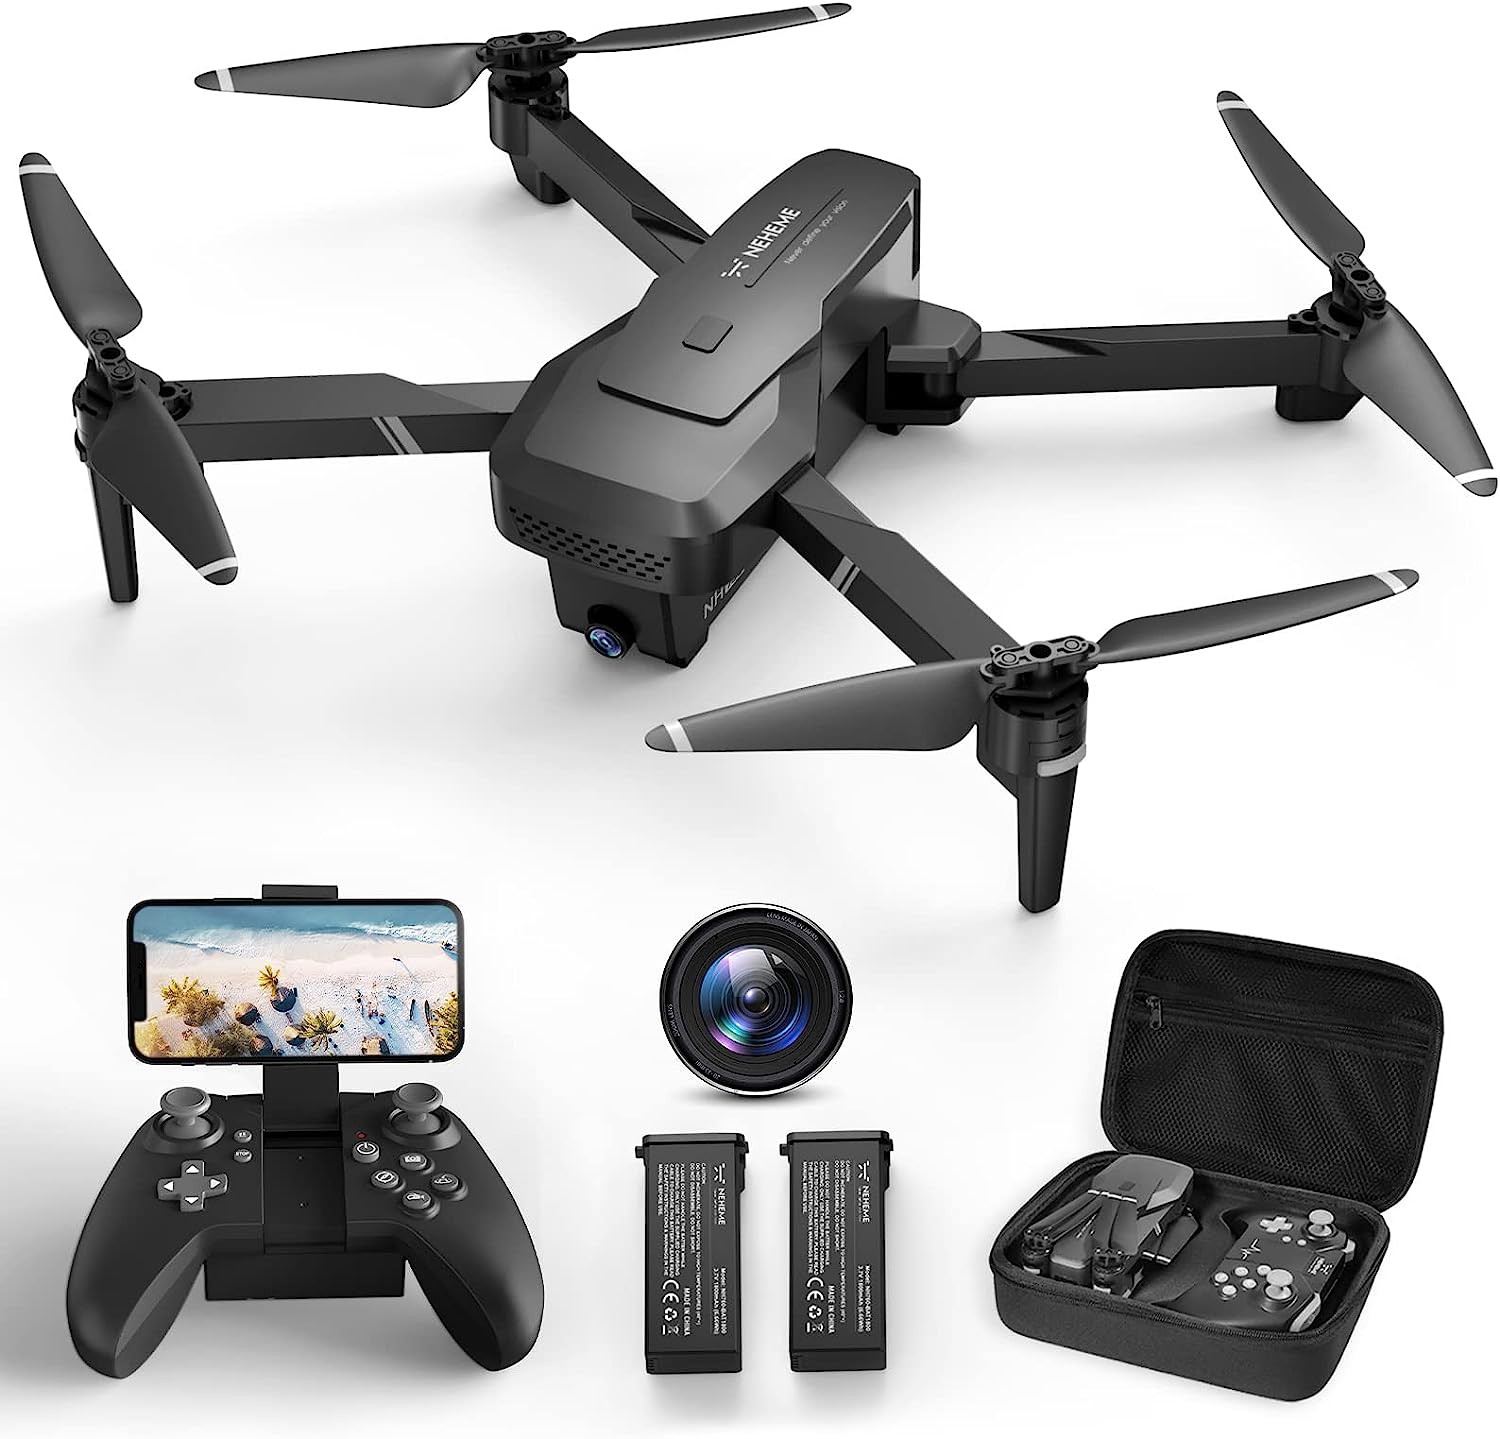 NEHEME Drones with Camera for Adults, NH760 1080P FPV Drone for Kids Beginners, Foldable WIFI RC Quadcopter with 2 Batteries for 32 Min Flight, Carrying Case, Altitude Hold, Toys Gifts for Boys Girls